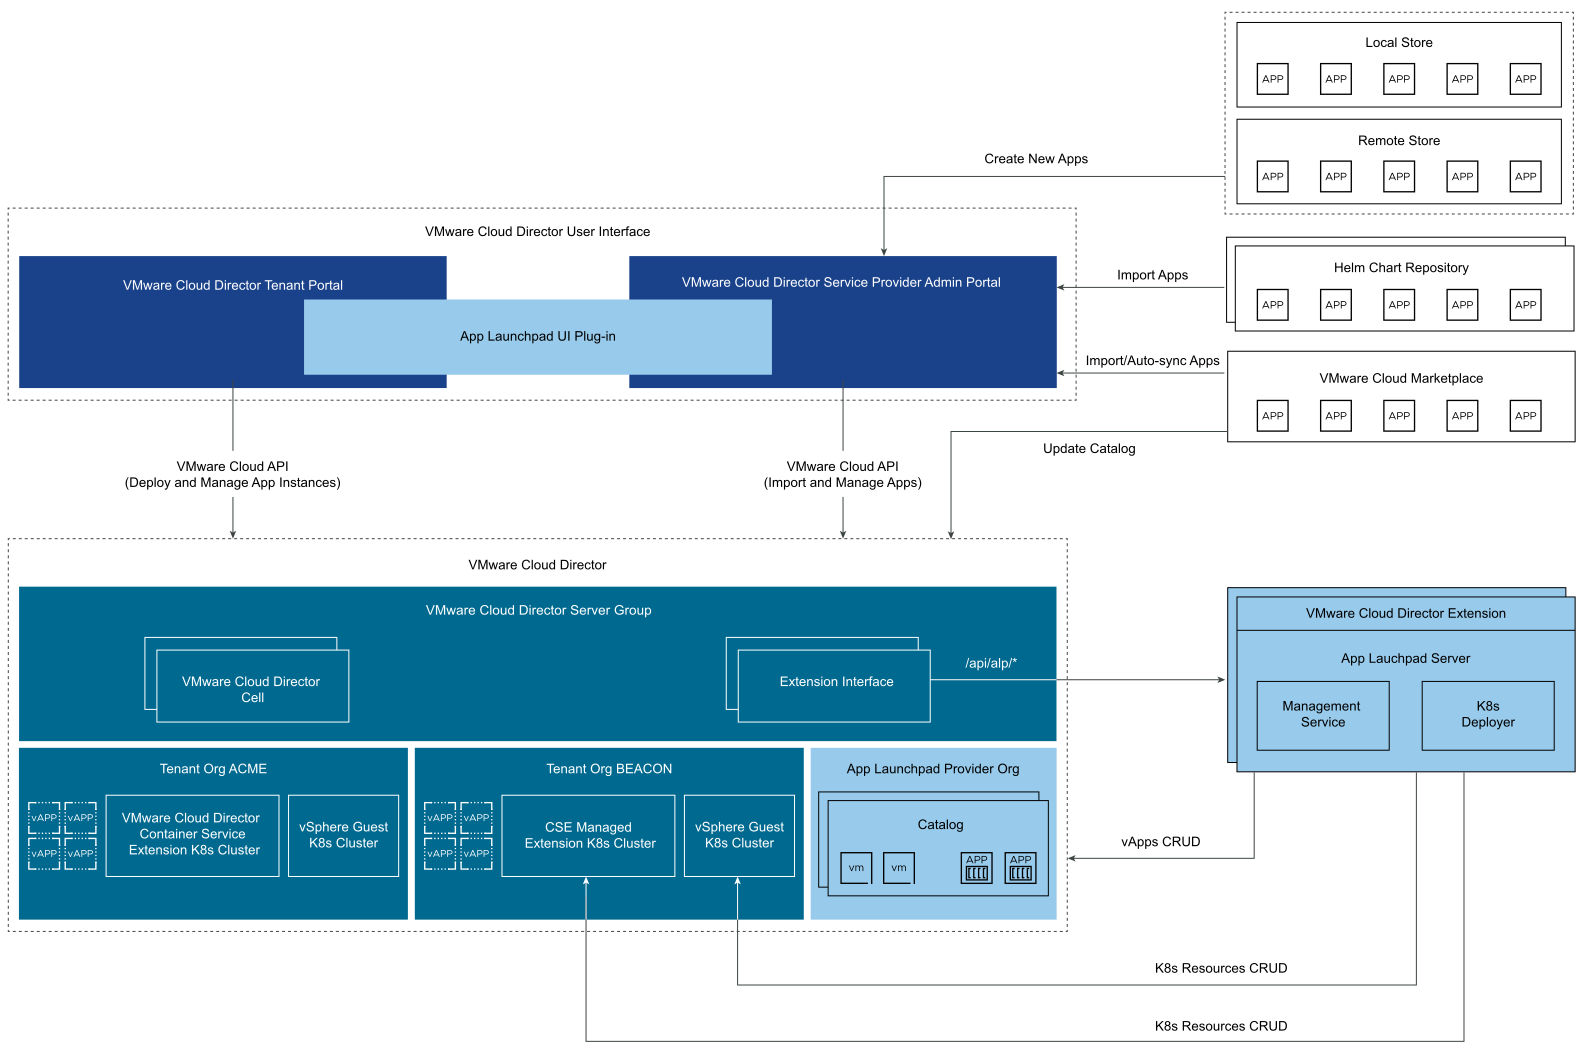 The diagram displays connections between App Launchpad and external components and VMware Cloud API and VMware Cloud Marketplace connections.